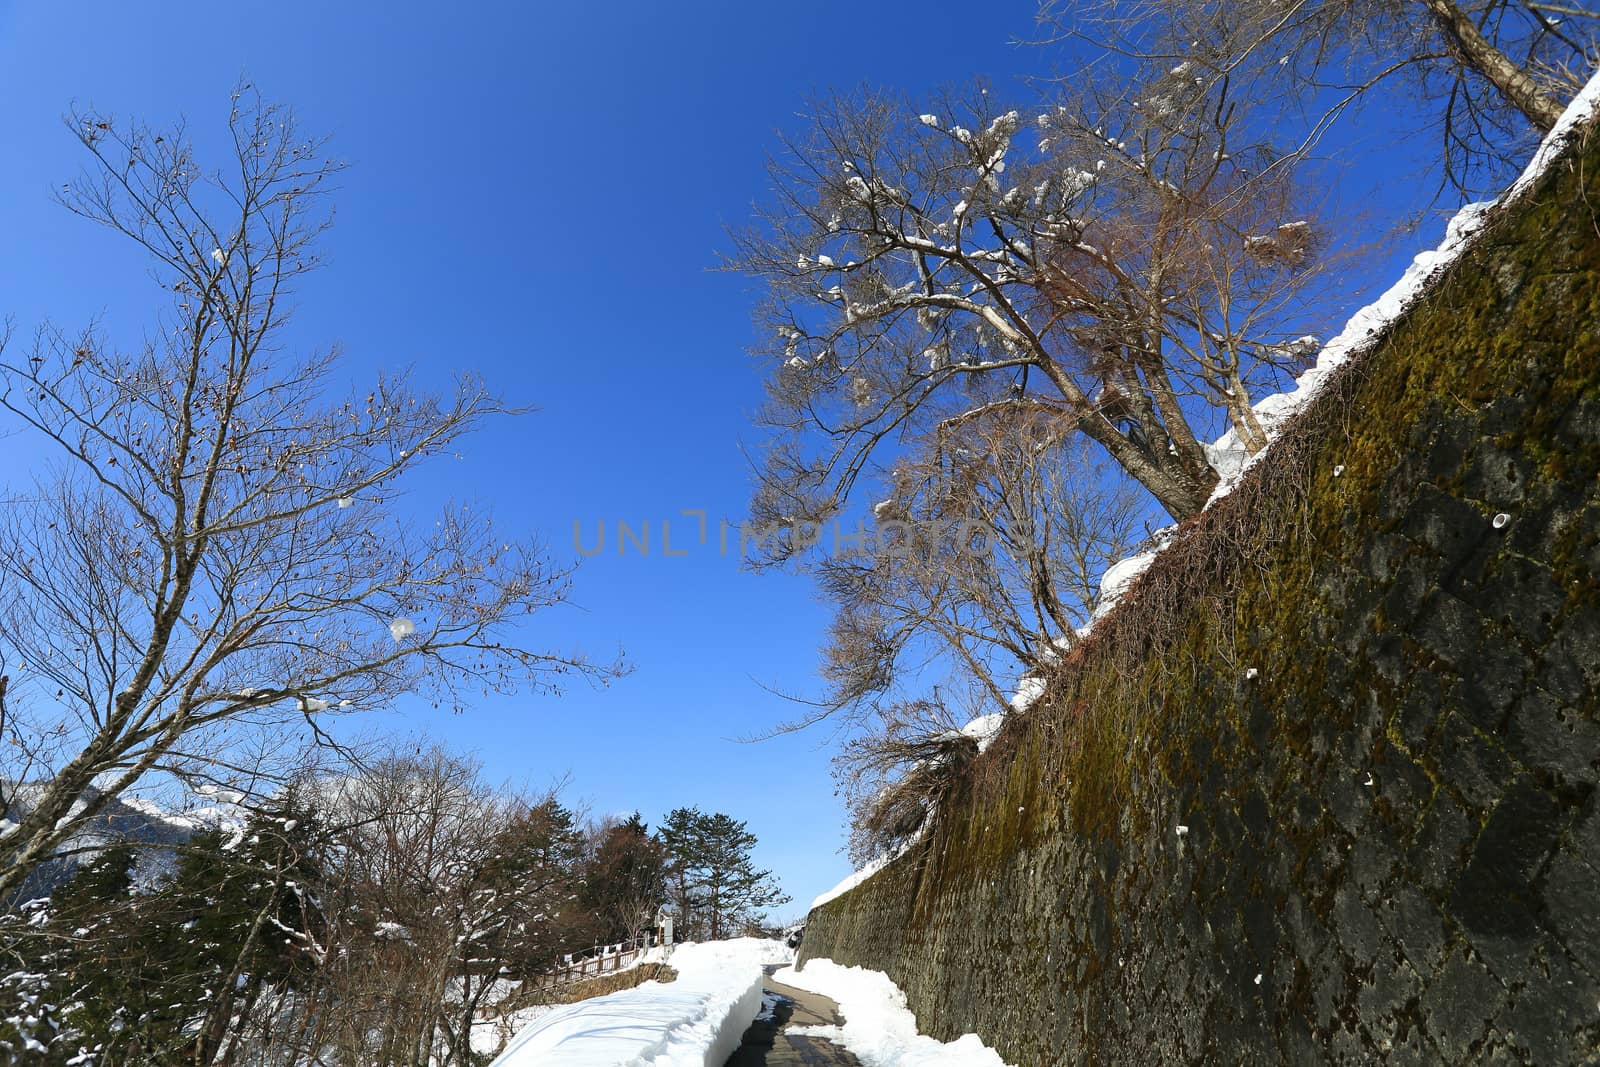 An up hill winding road leads people to Shiroyama Viewpoint